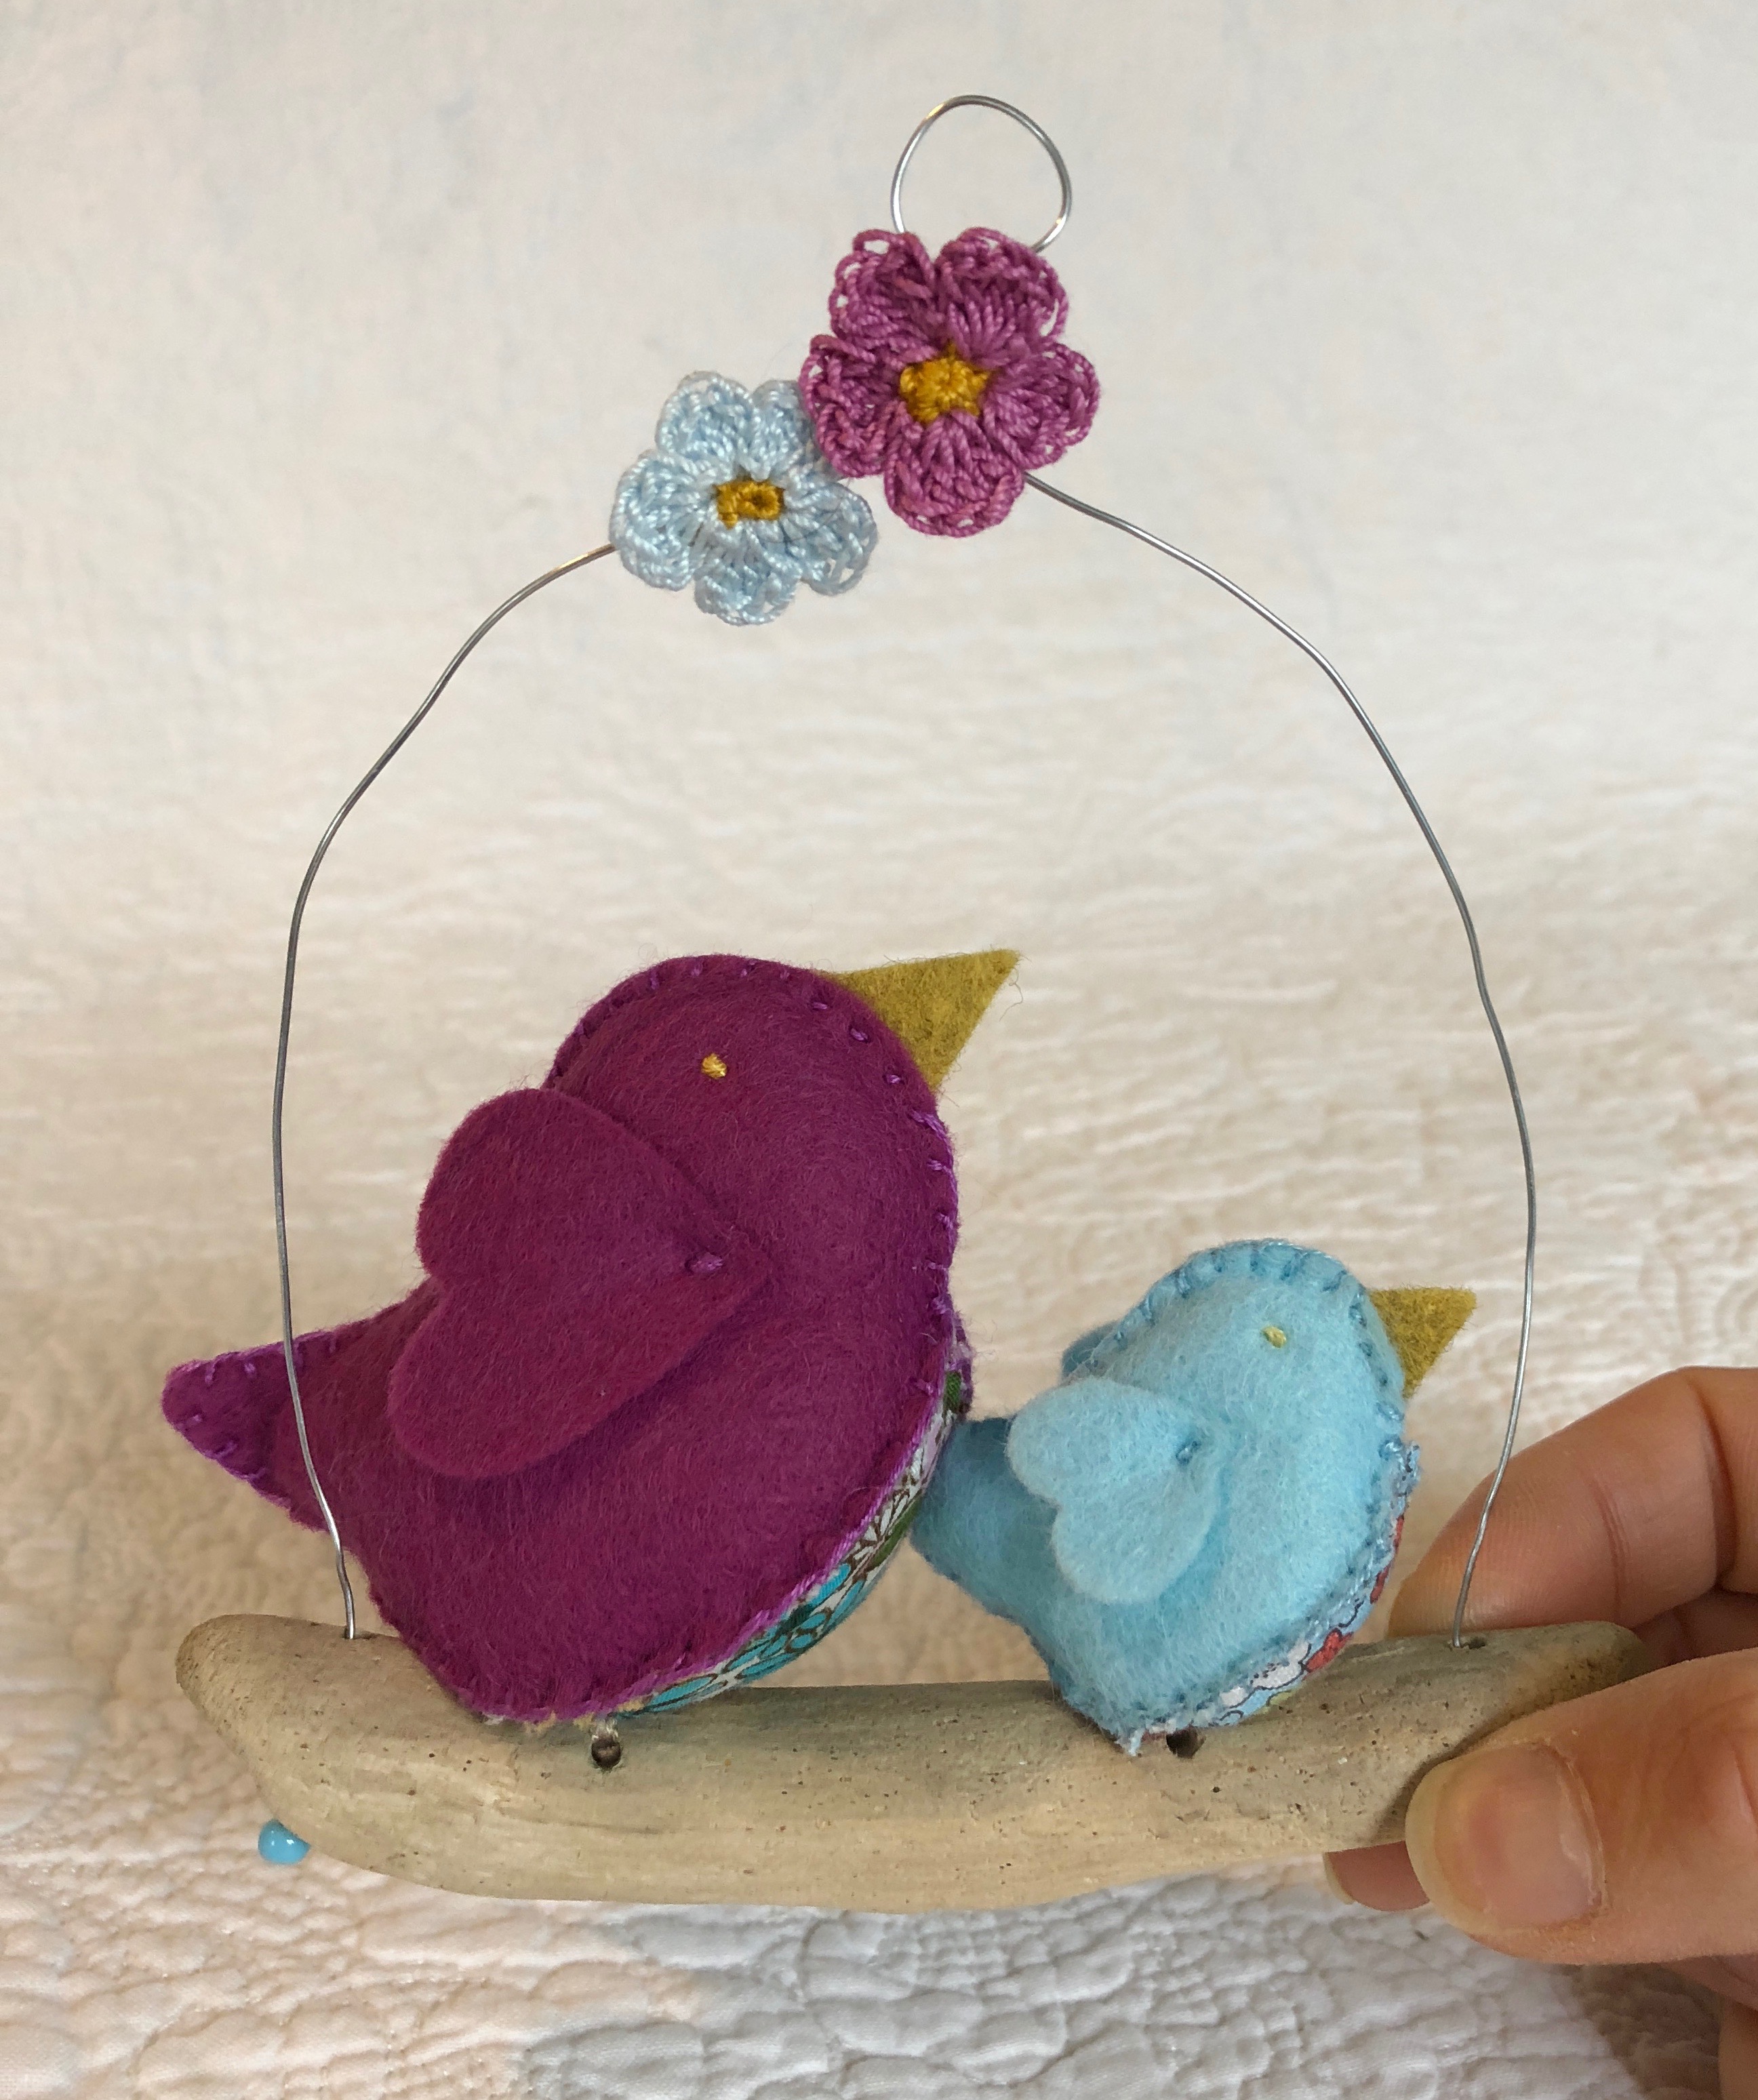 Hanging decoration. Hand sewn felt and floral cotton fabric little birds on a driftwood branch.